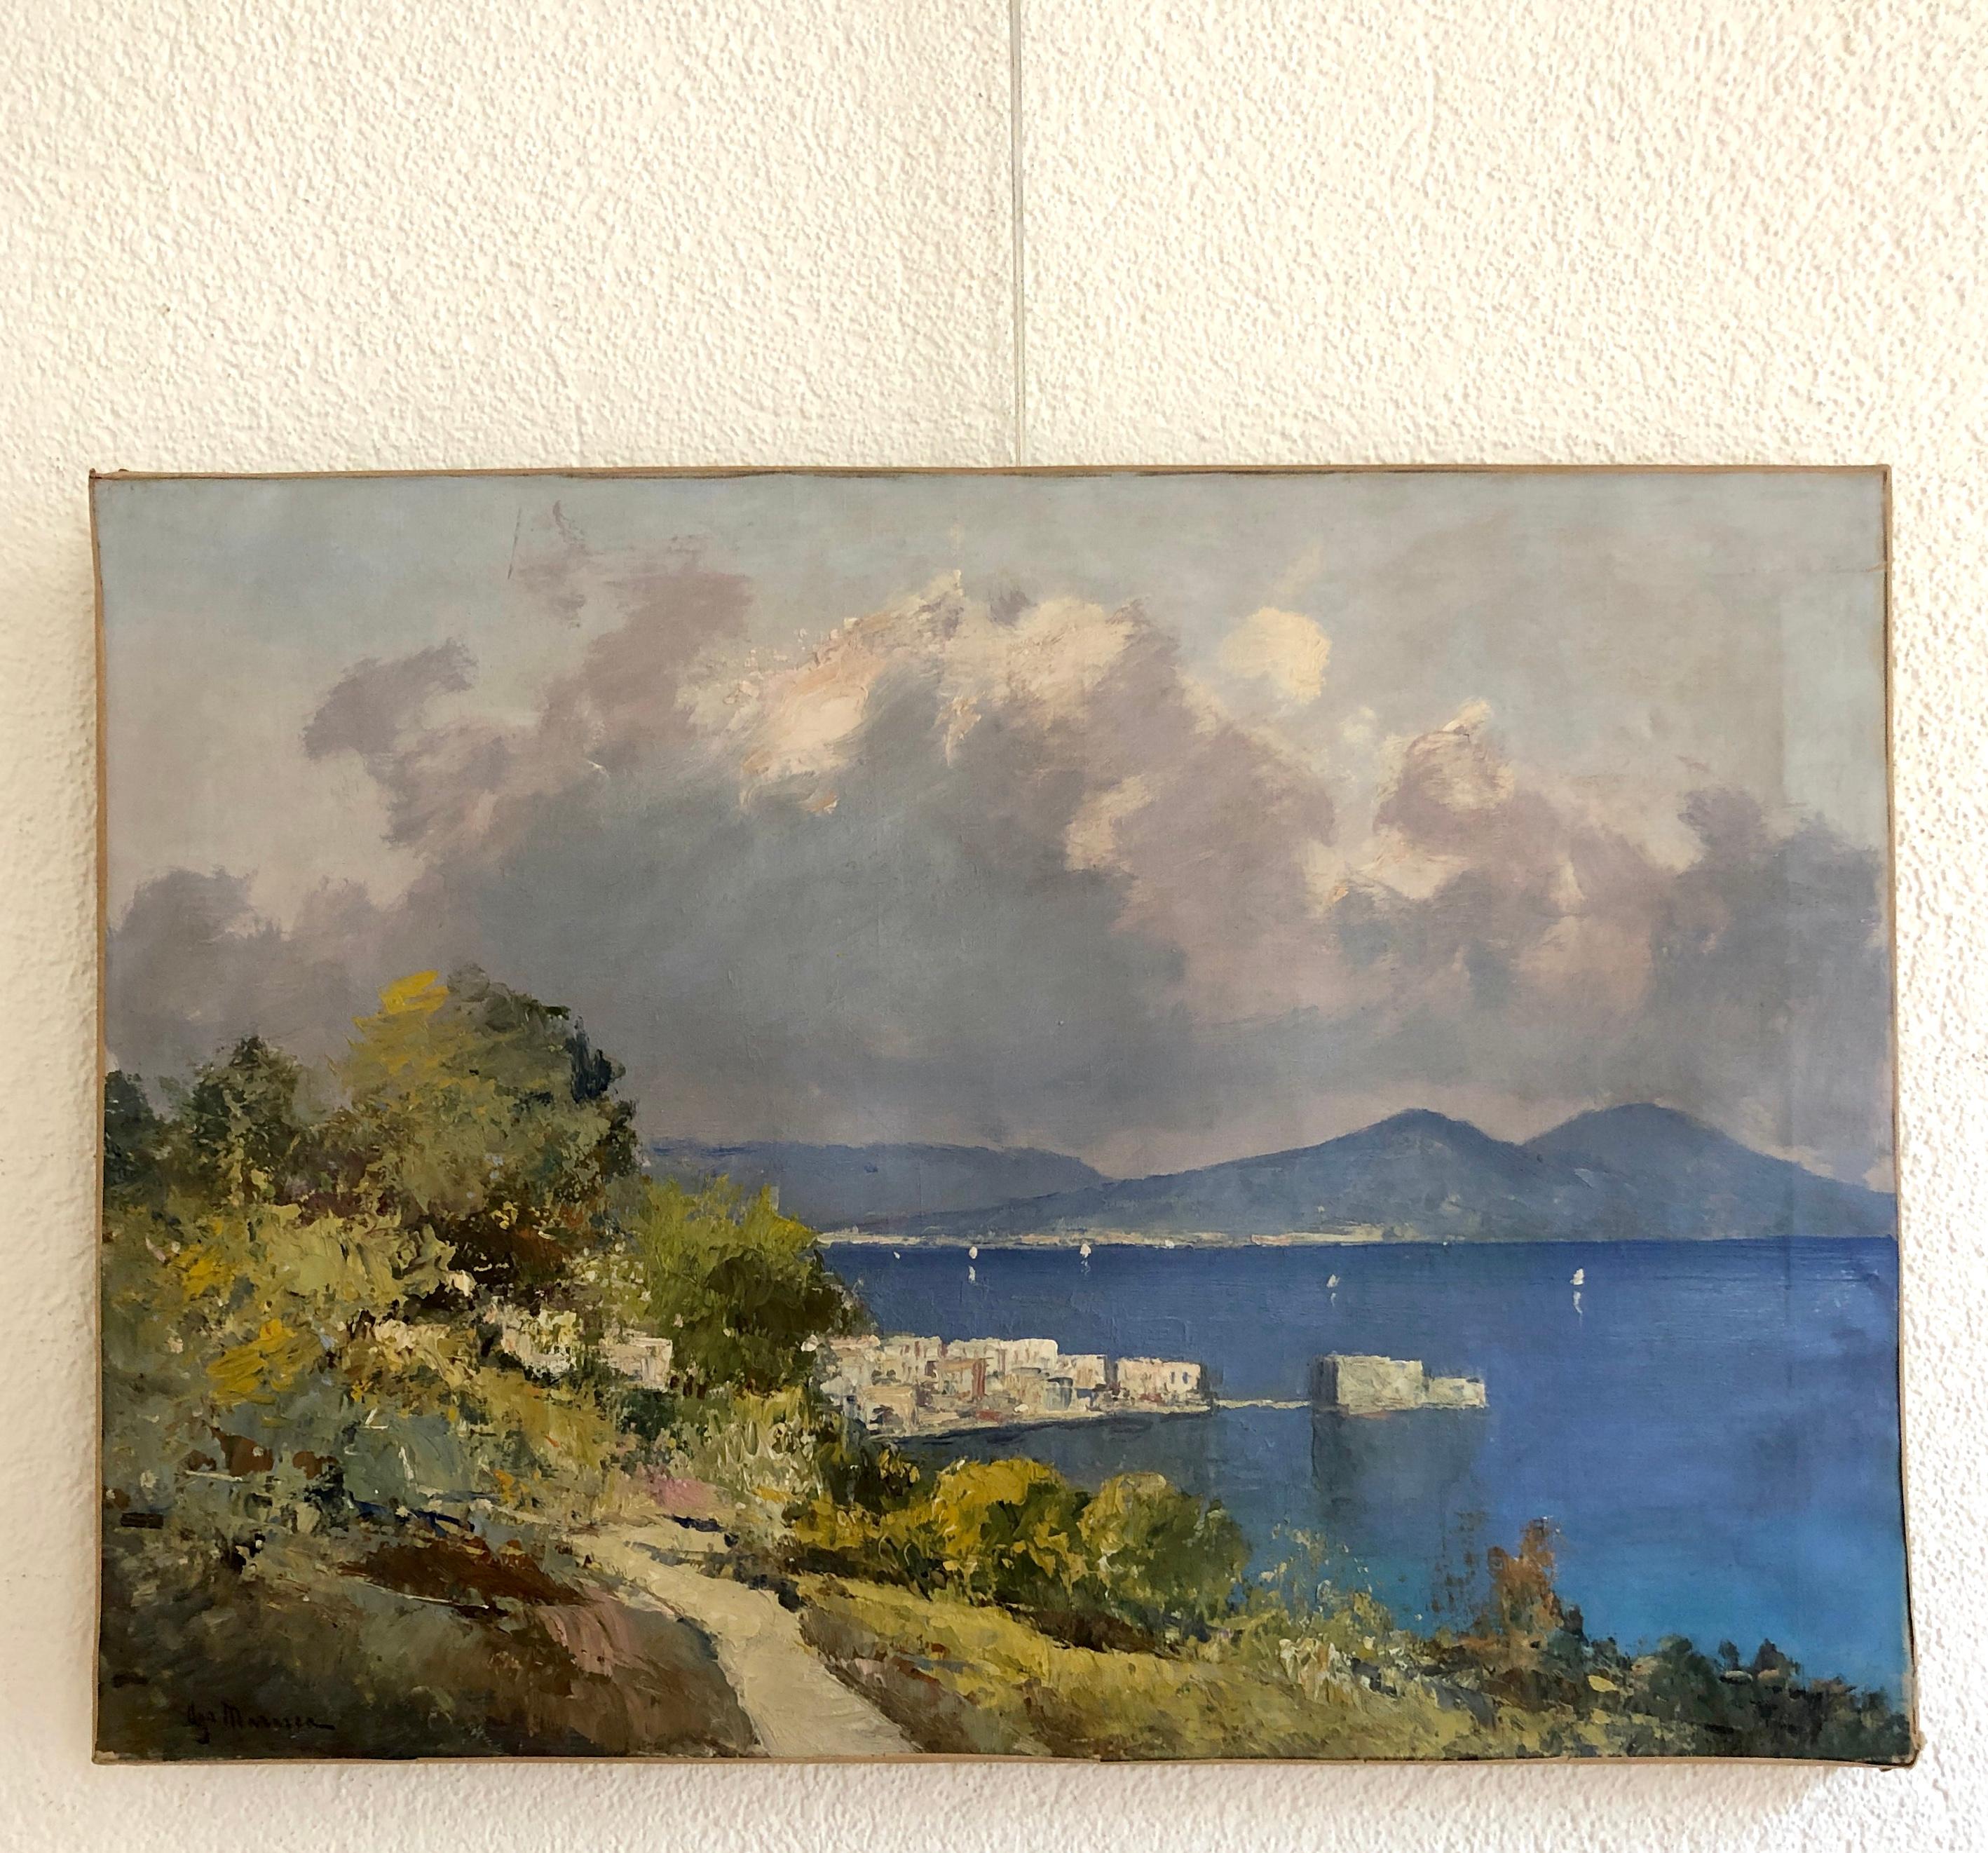 Bay of Naples and view of Vesuvius - Painting by U.Maresca